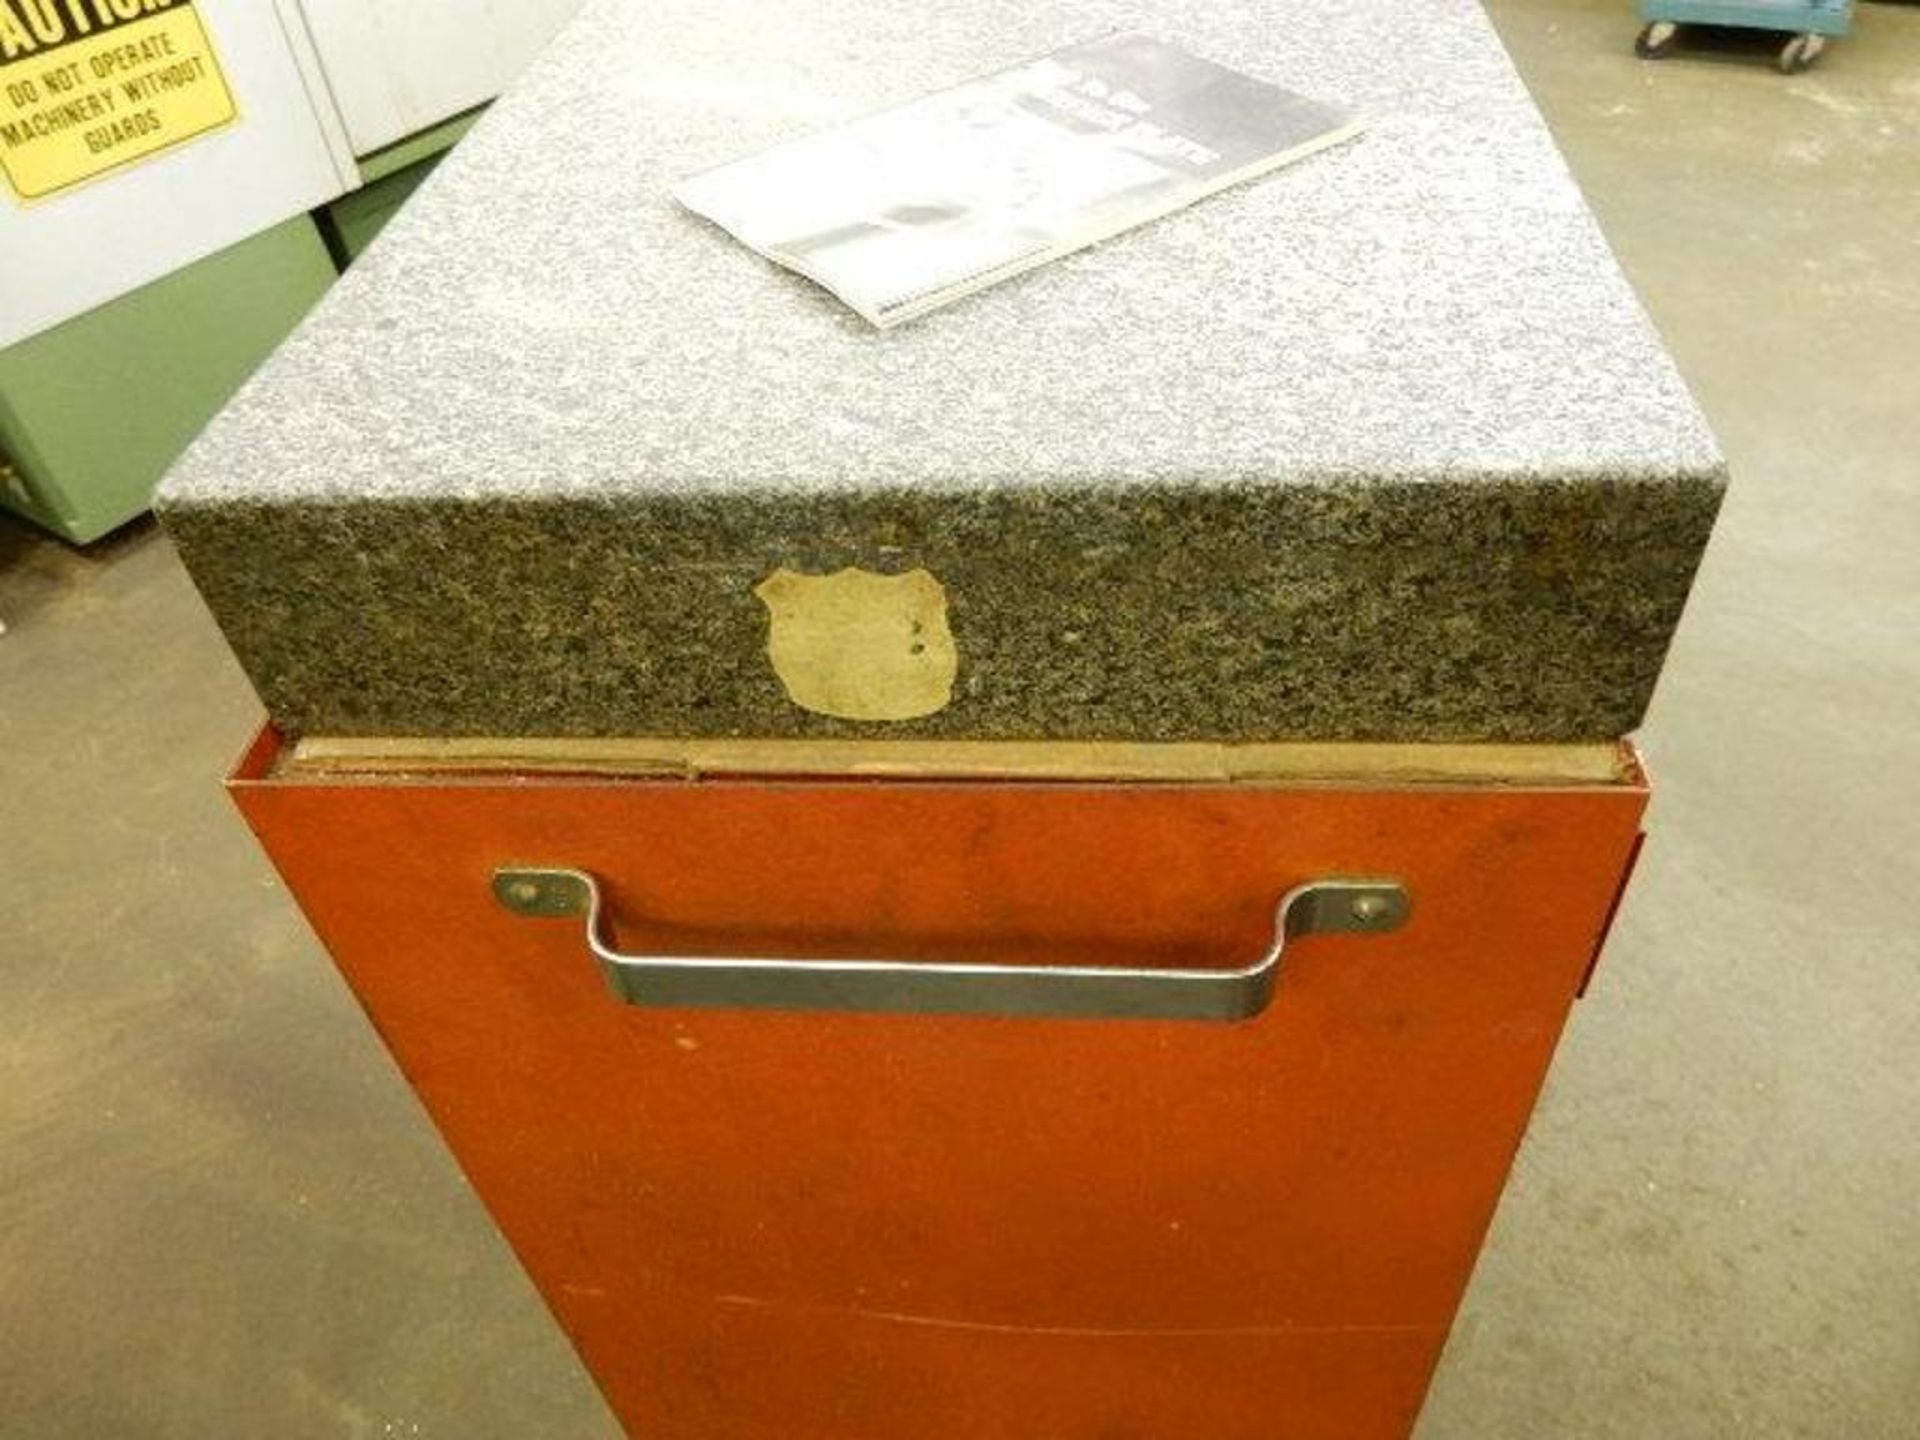 Kennedy Tool Box, with 18" x 24" x 4" Granite Surface Plate - Image 3 of 6